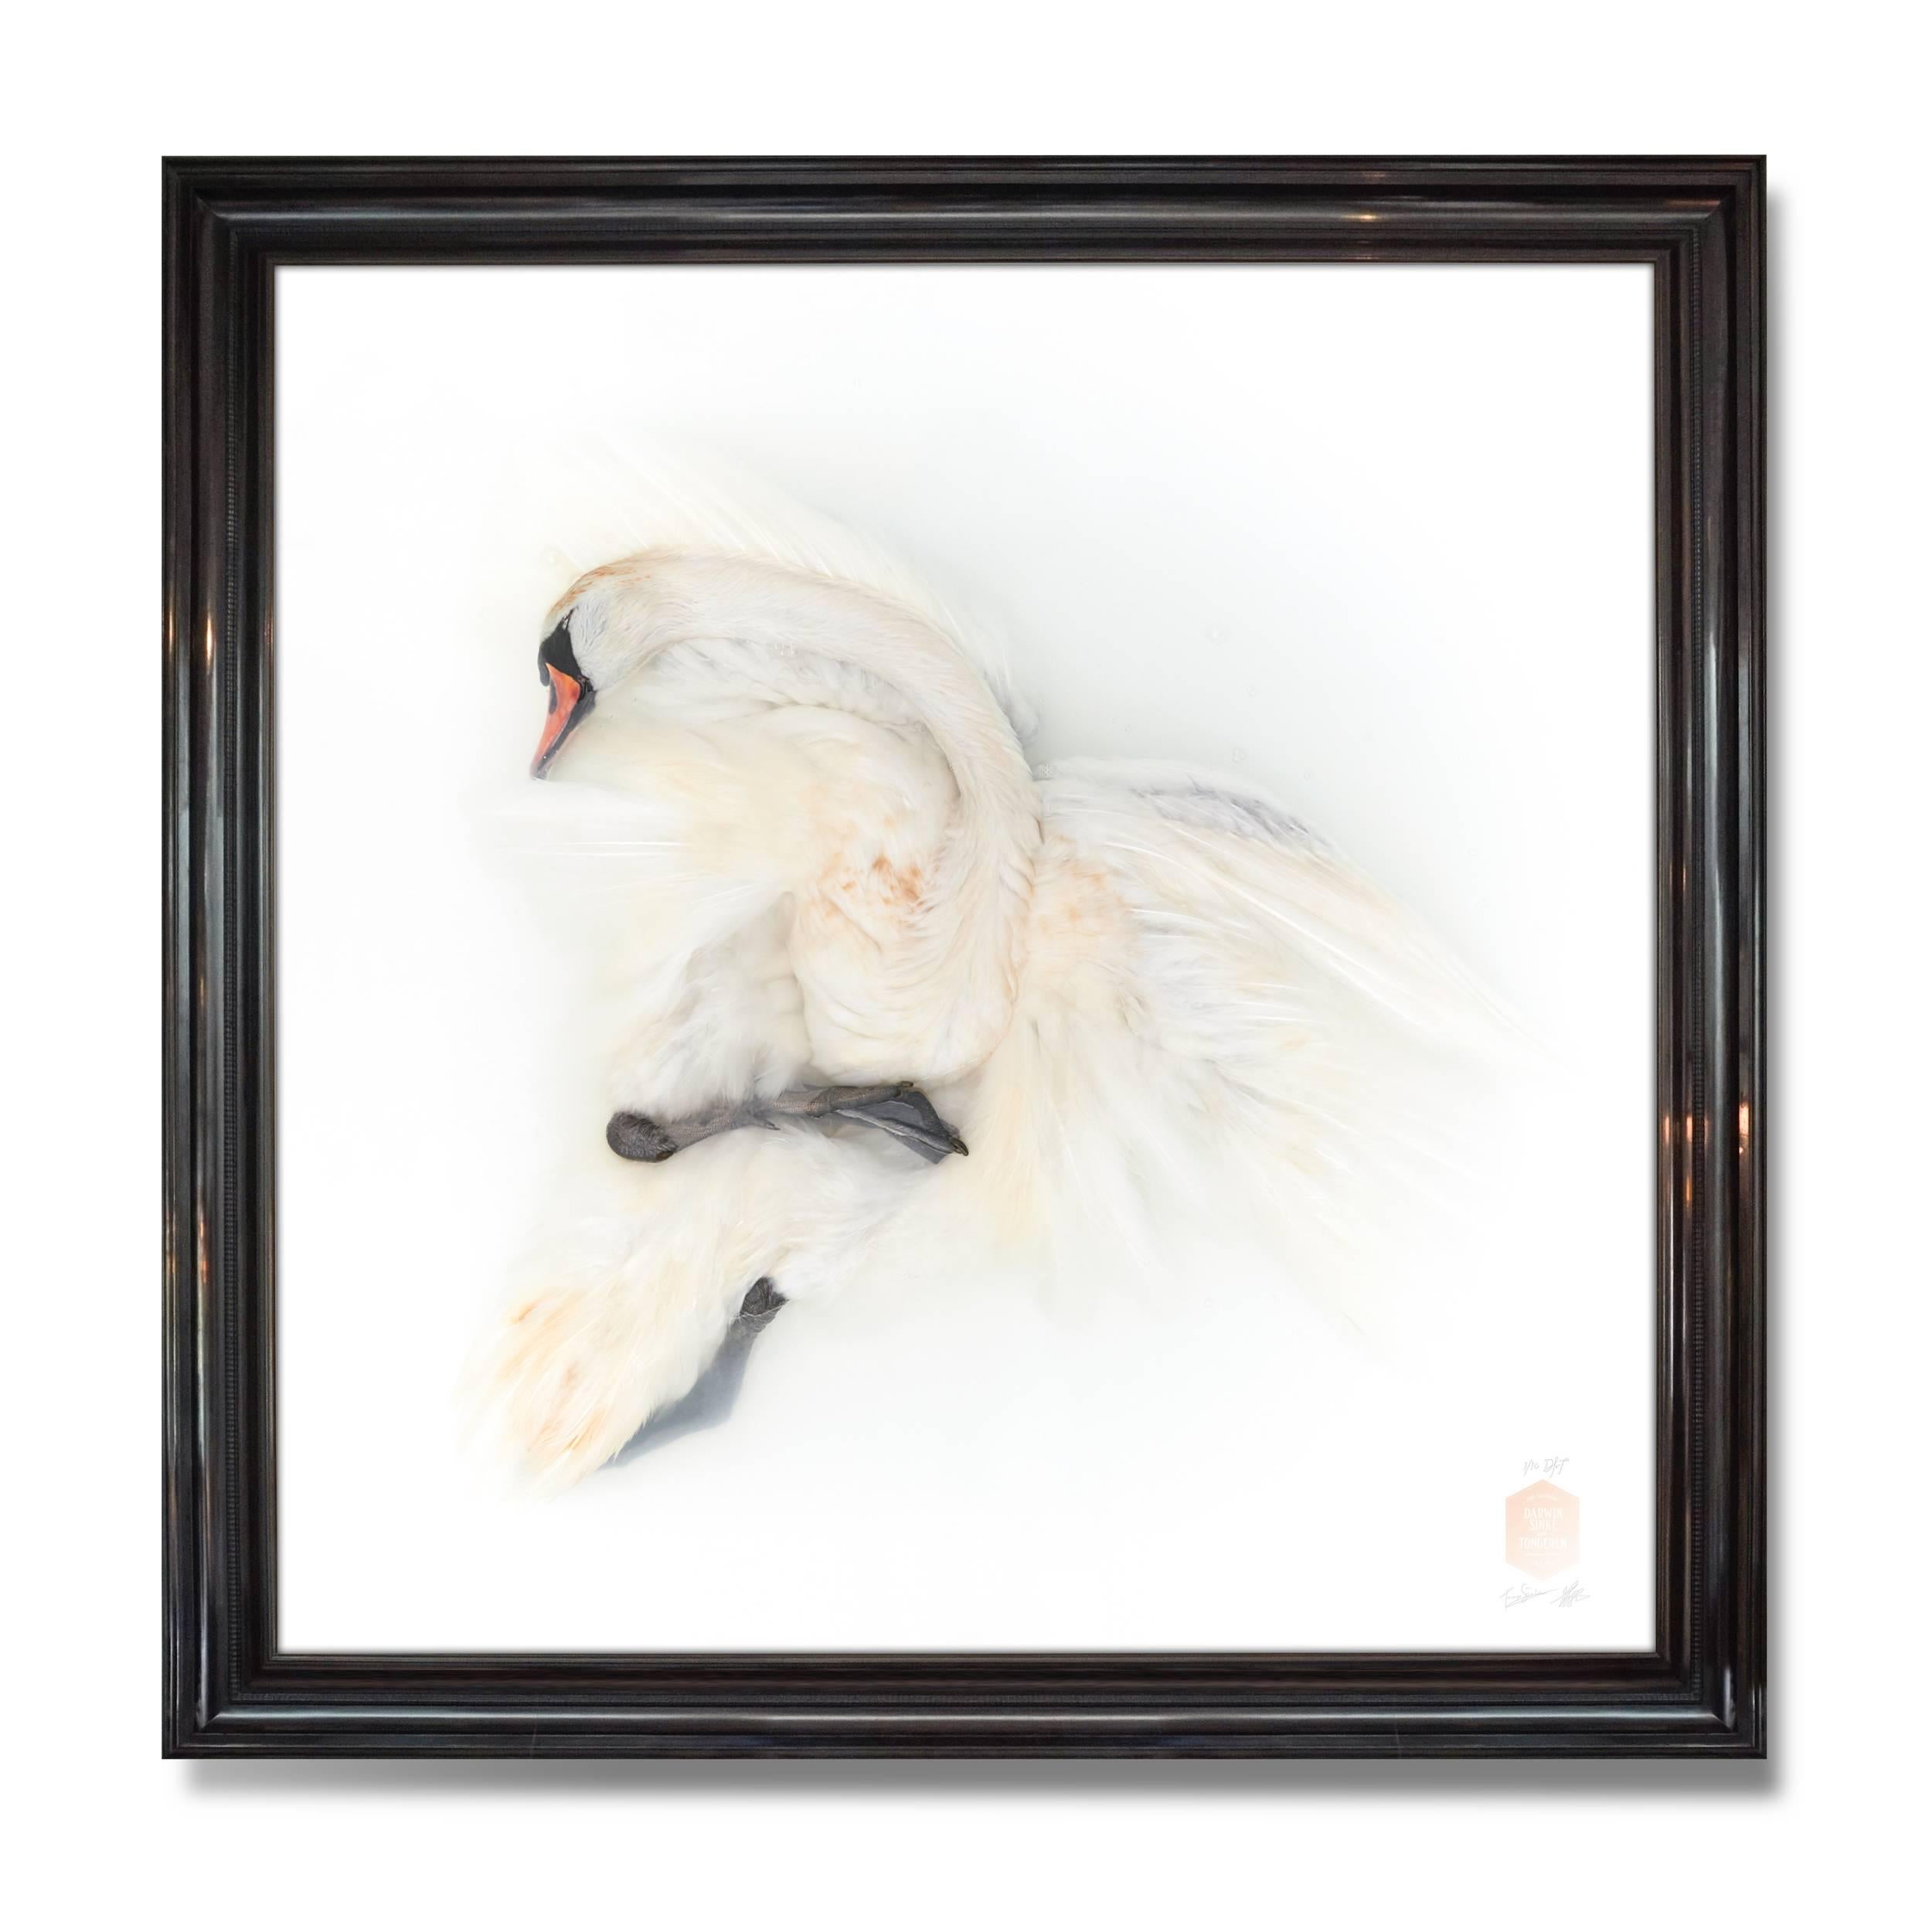 Title:
Unknown Pose by Mute Swan II. Edition of 10.
Also available as a duo. Please inquire.

Size:
160 x 160 cm (63 x 63 in).
Size Framed (optional).
174 x 174 cm (68.5 x 68.5 in).

Medium:
Gicle´e Fine Art Print on Hahnemuehle Photo Rag Ultra